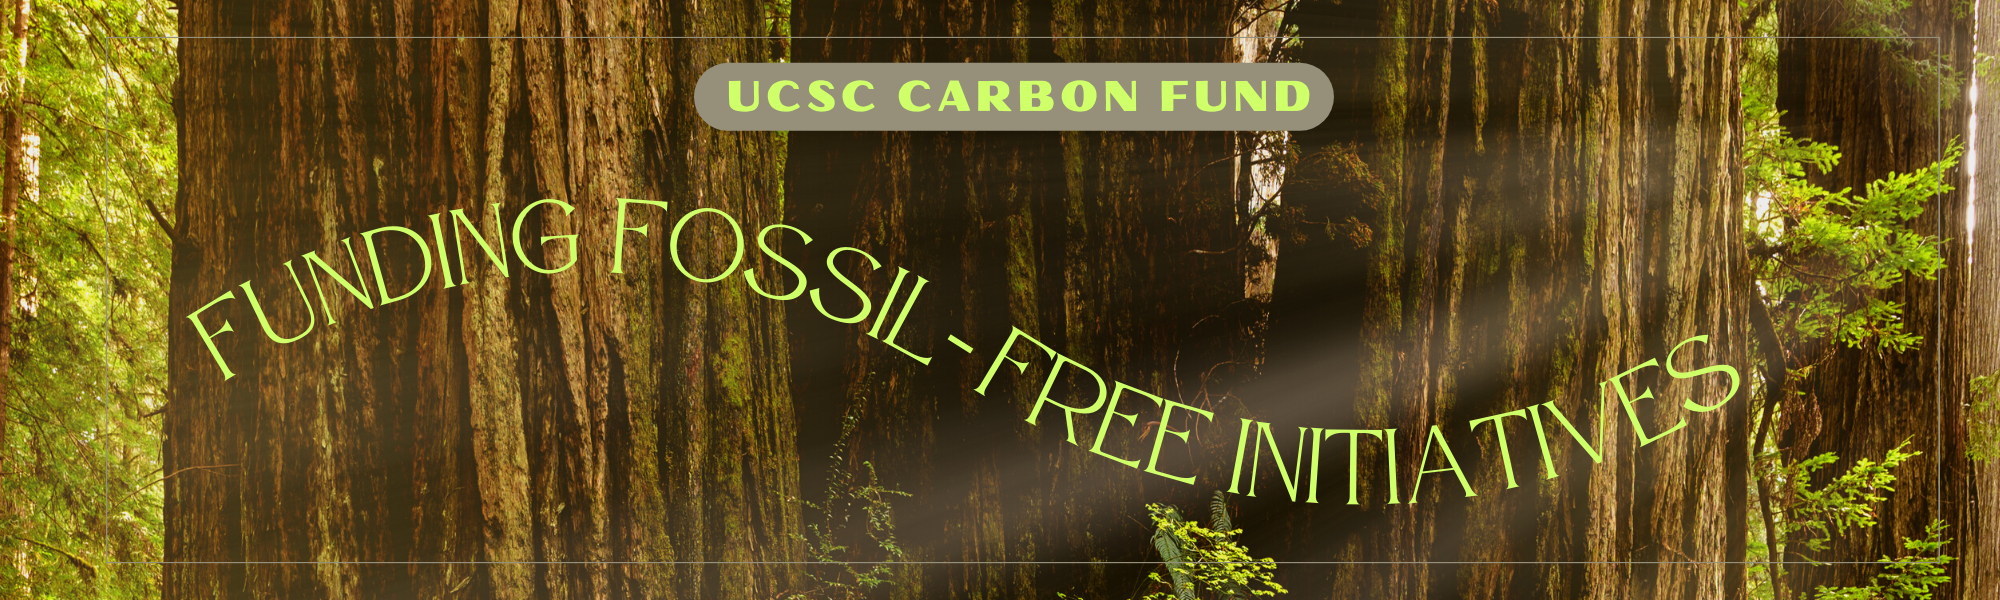 Carbonfund About Banner 